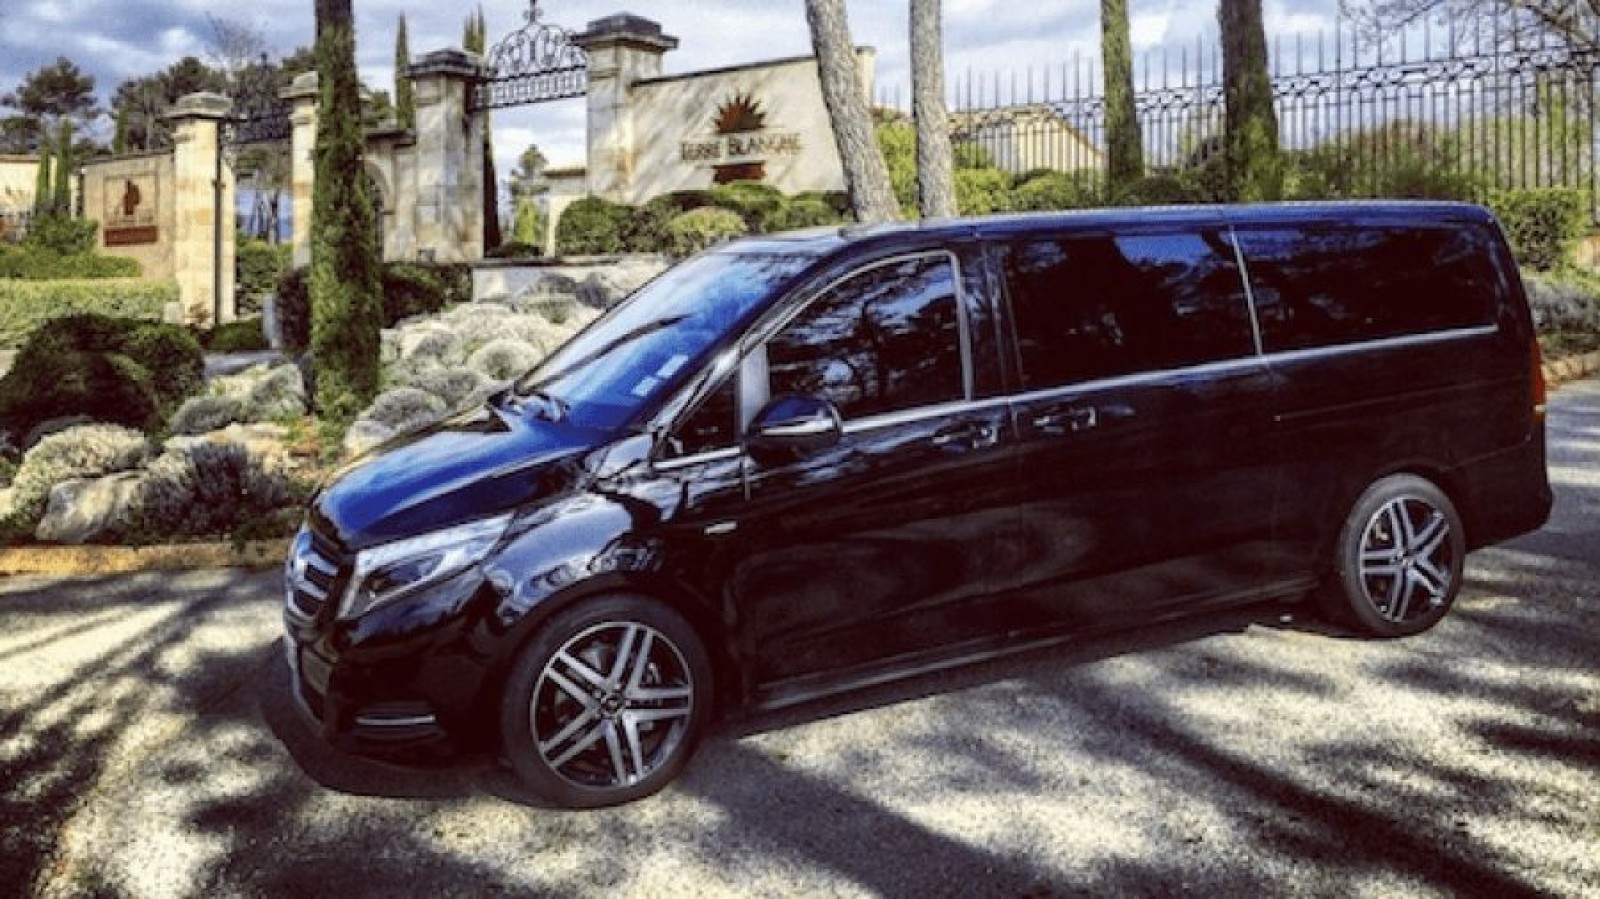 Private Chauffeur in Monaco for Weddings - Premium Vehicles & Services - Reactivity 24/7 - Ruby Services - Car Rental with Chauffeur in Monaco